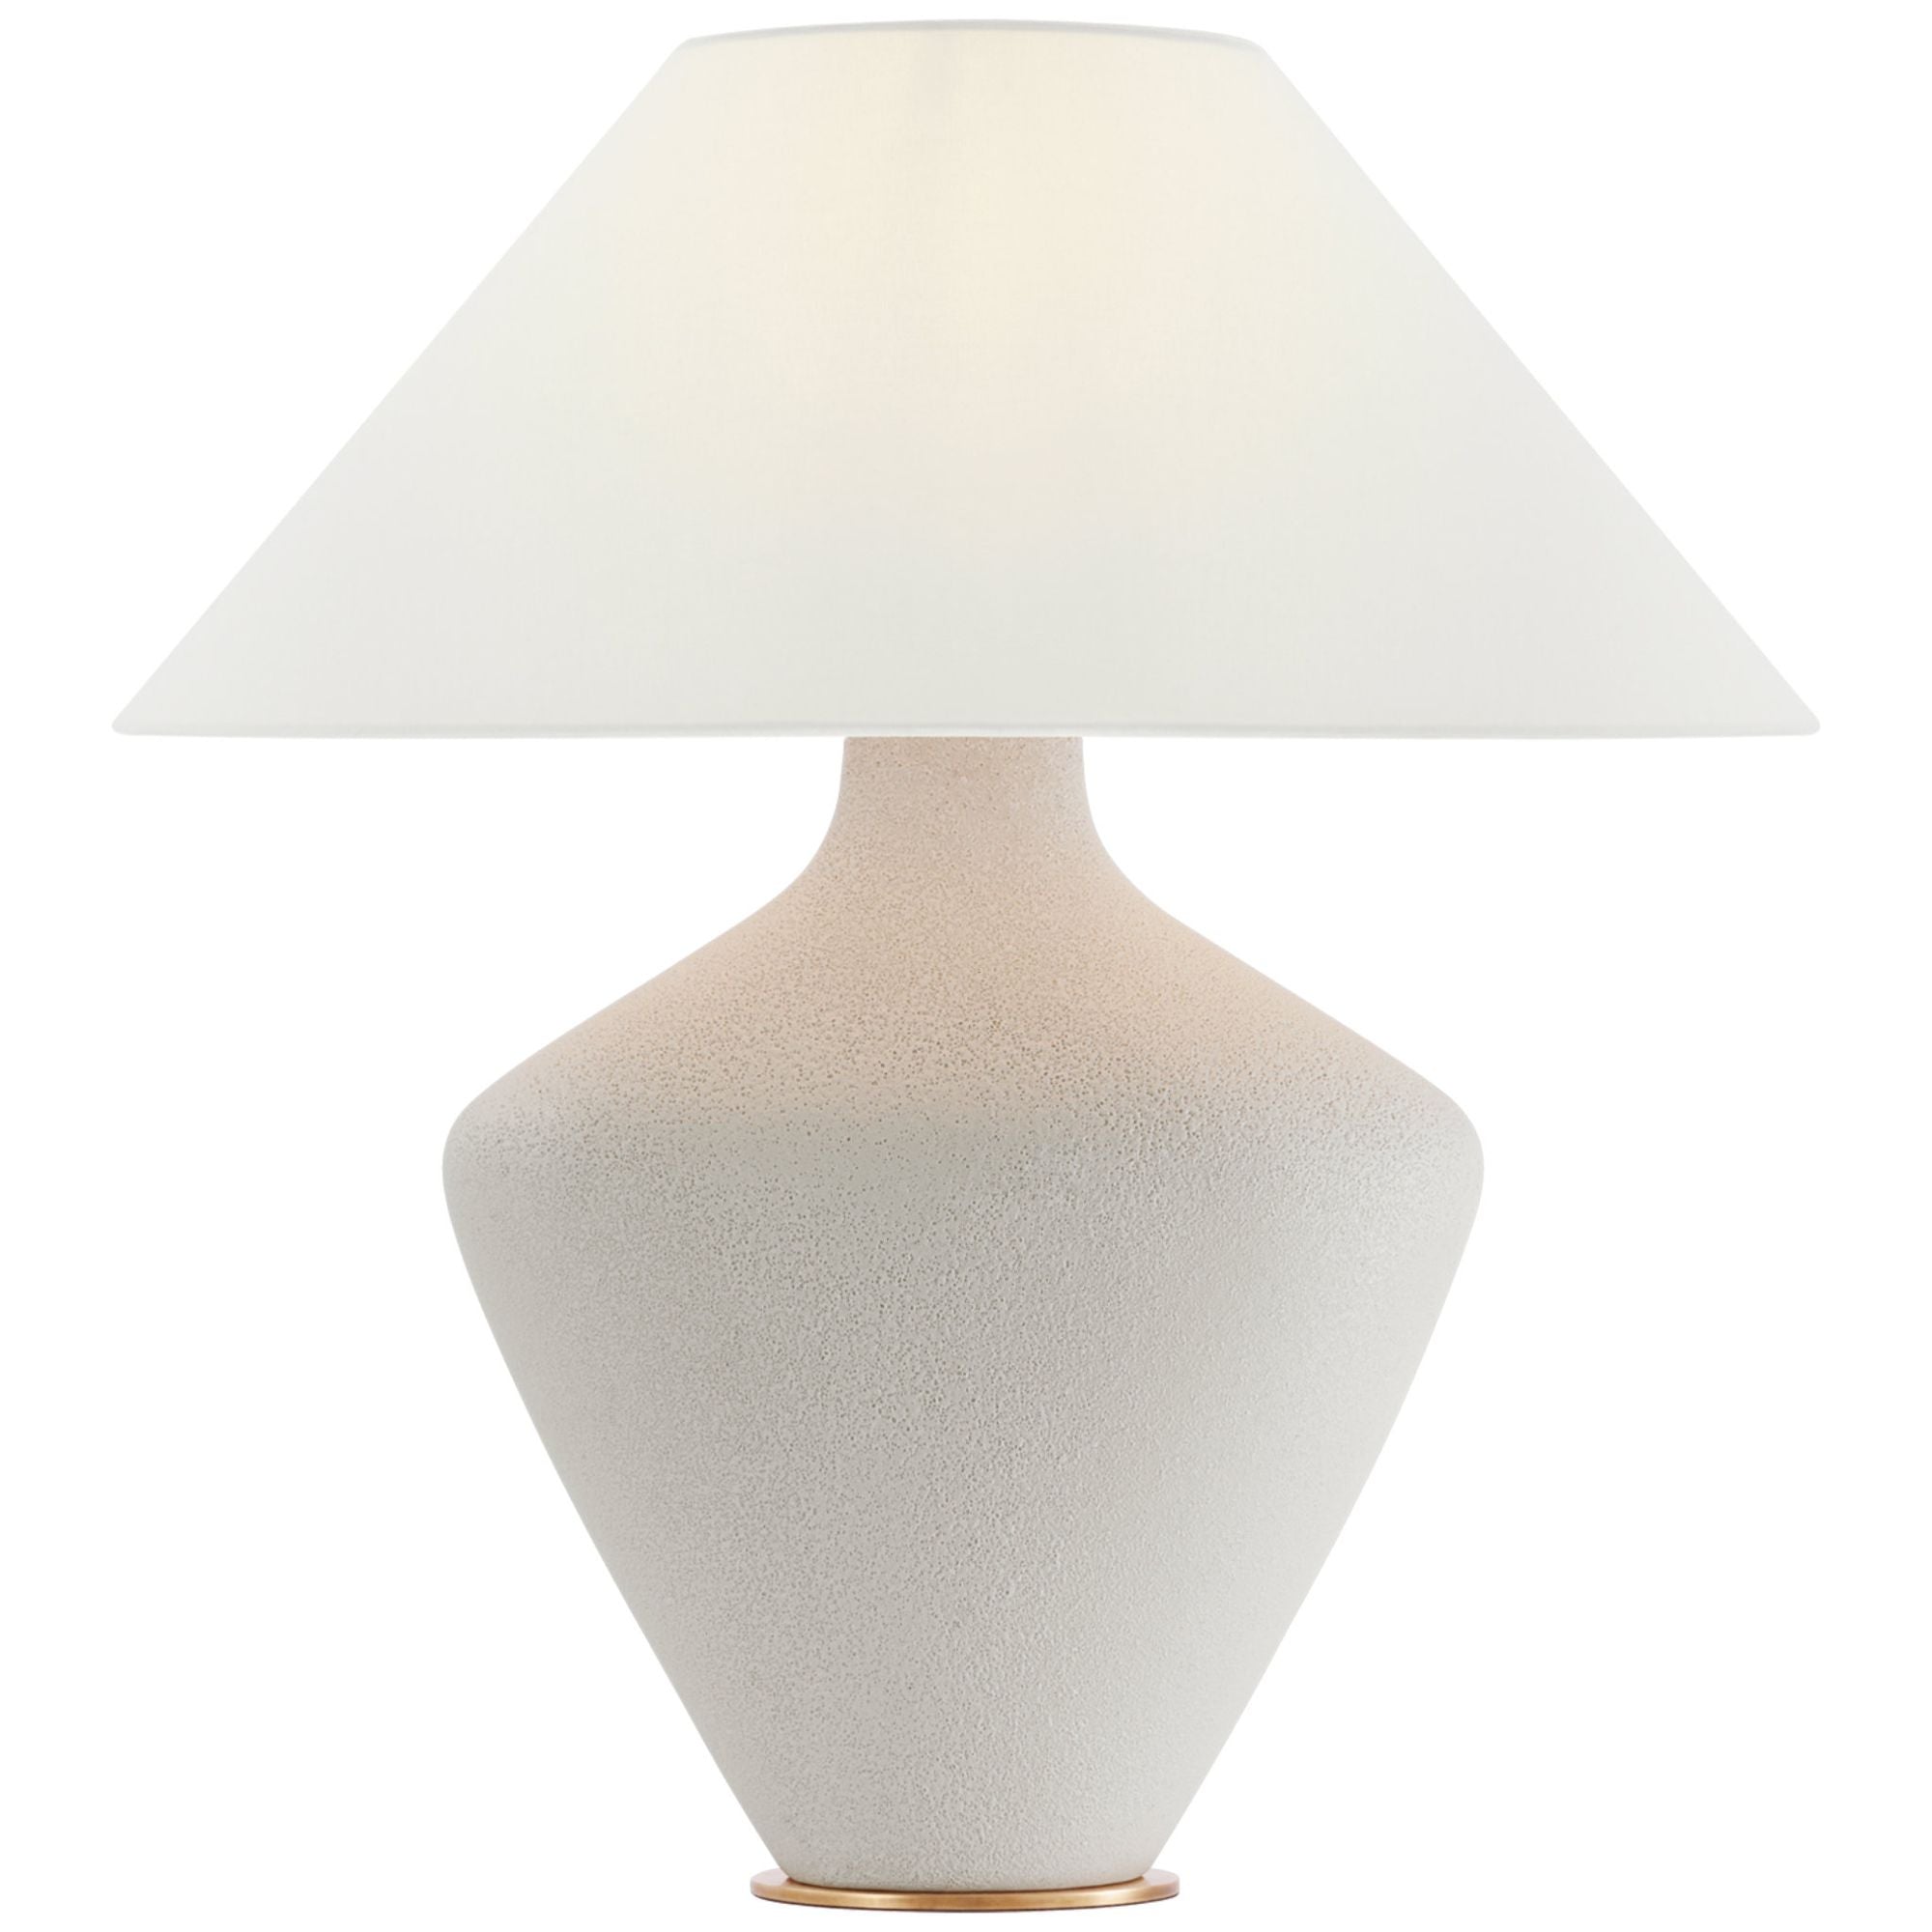 Kelly Wearstler Rohs Extra Large Table Lamp in Porous White with Linen Shade